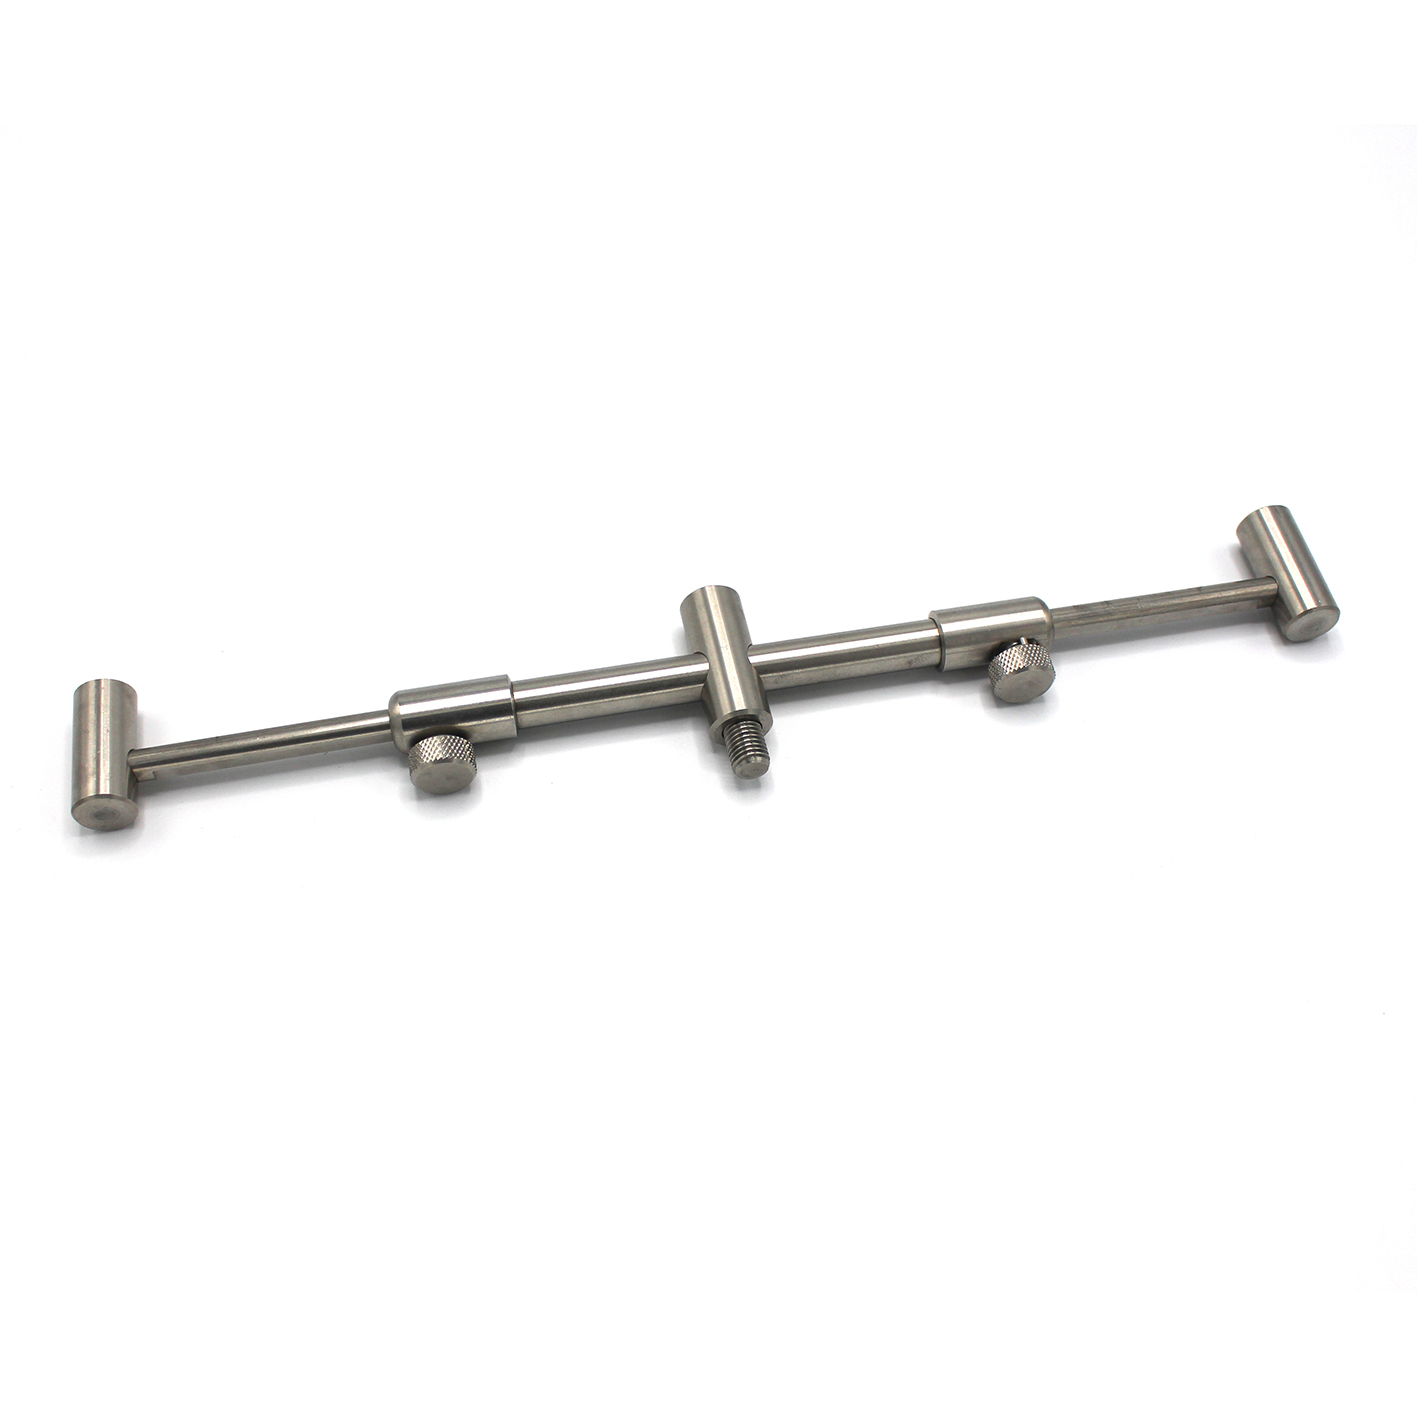 Stainless 3 Rod Adjustable Buzz Bar Extended